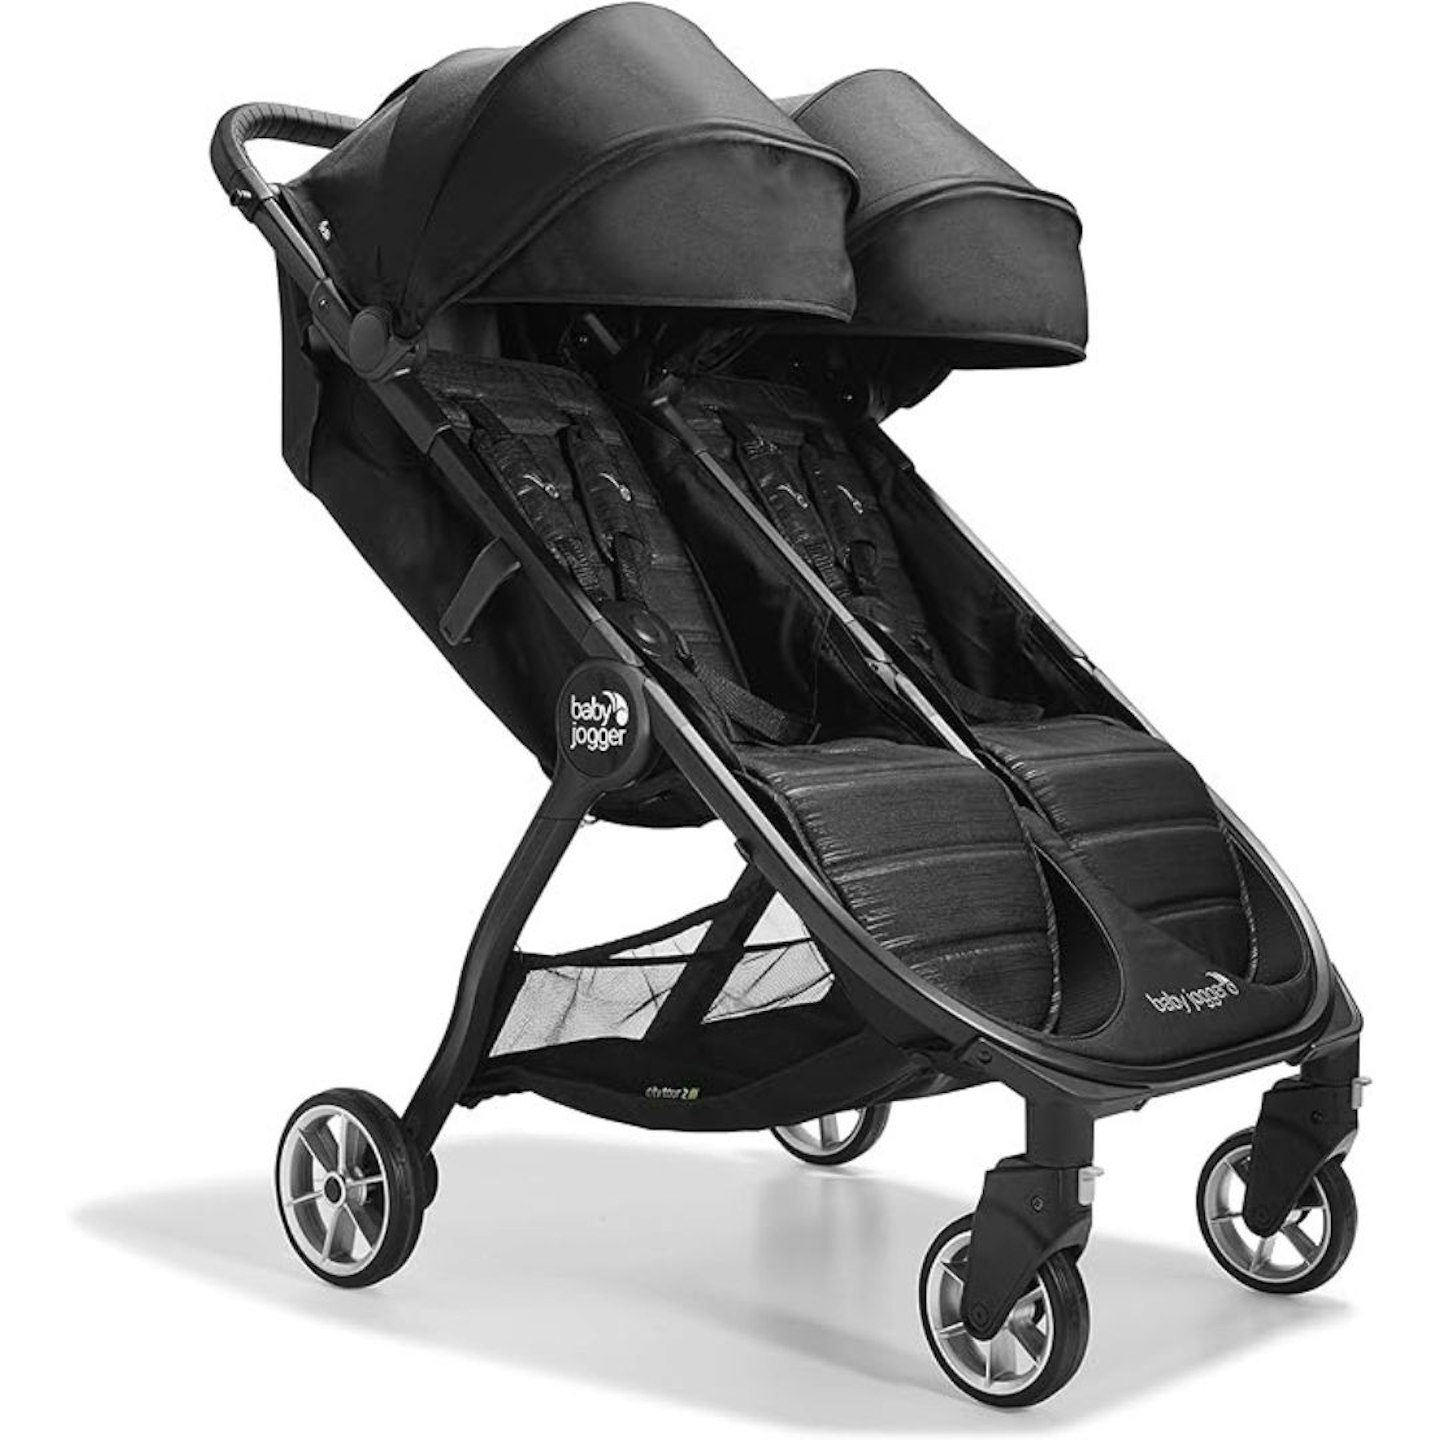 Best Double Prams: Baby Jogger City Tour 2 Double Travel Pushchair